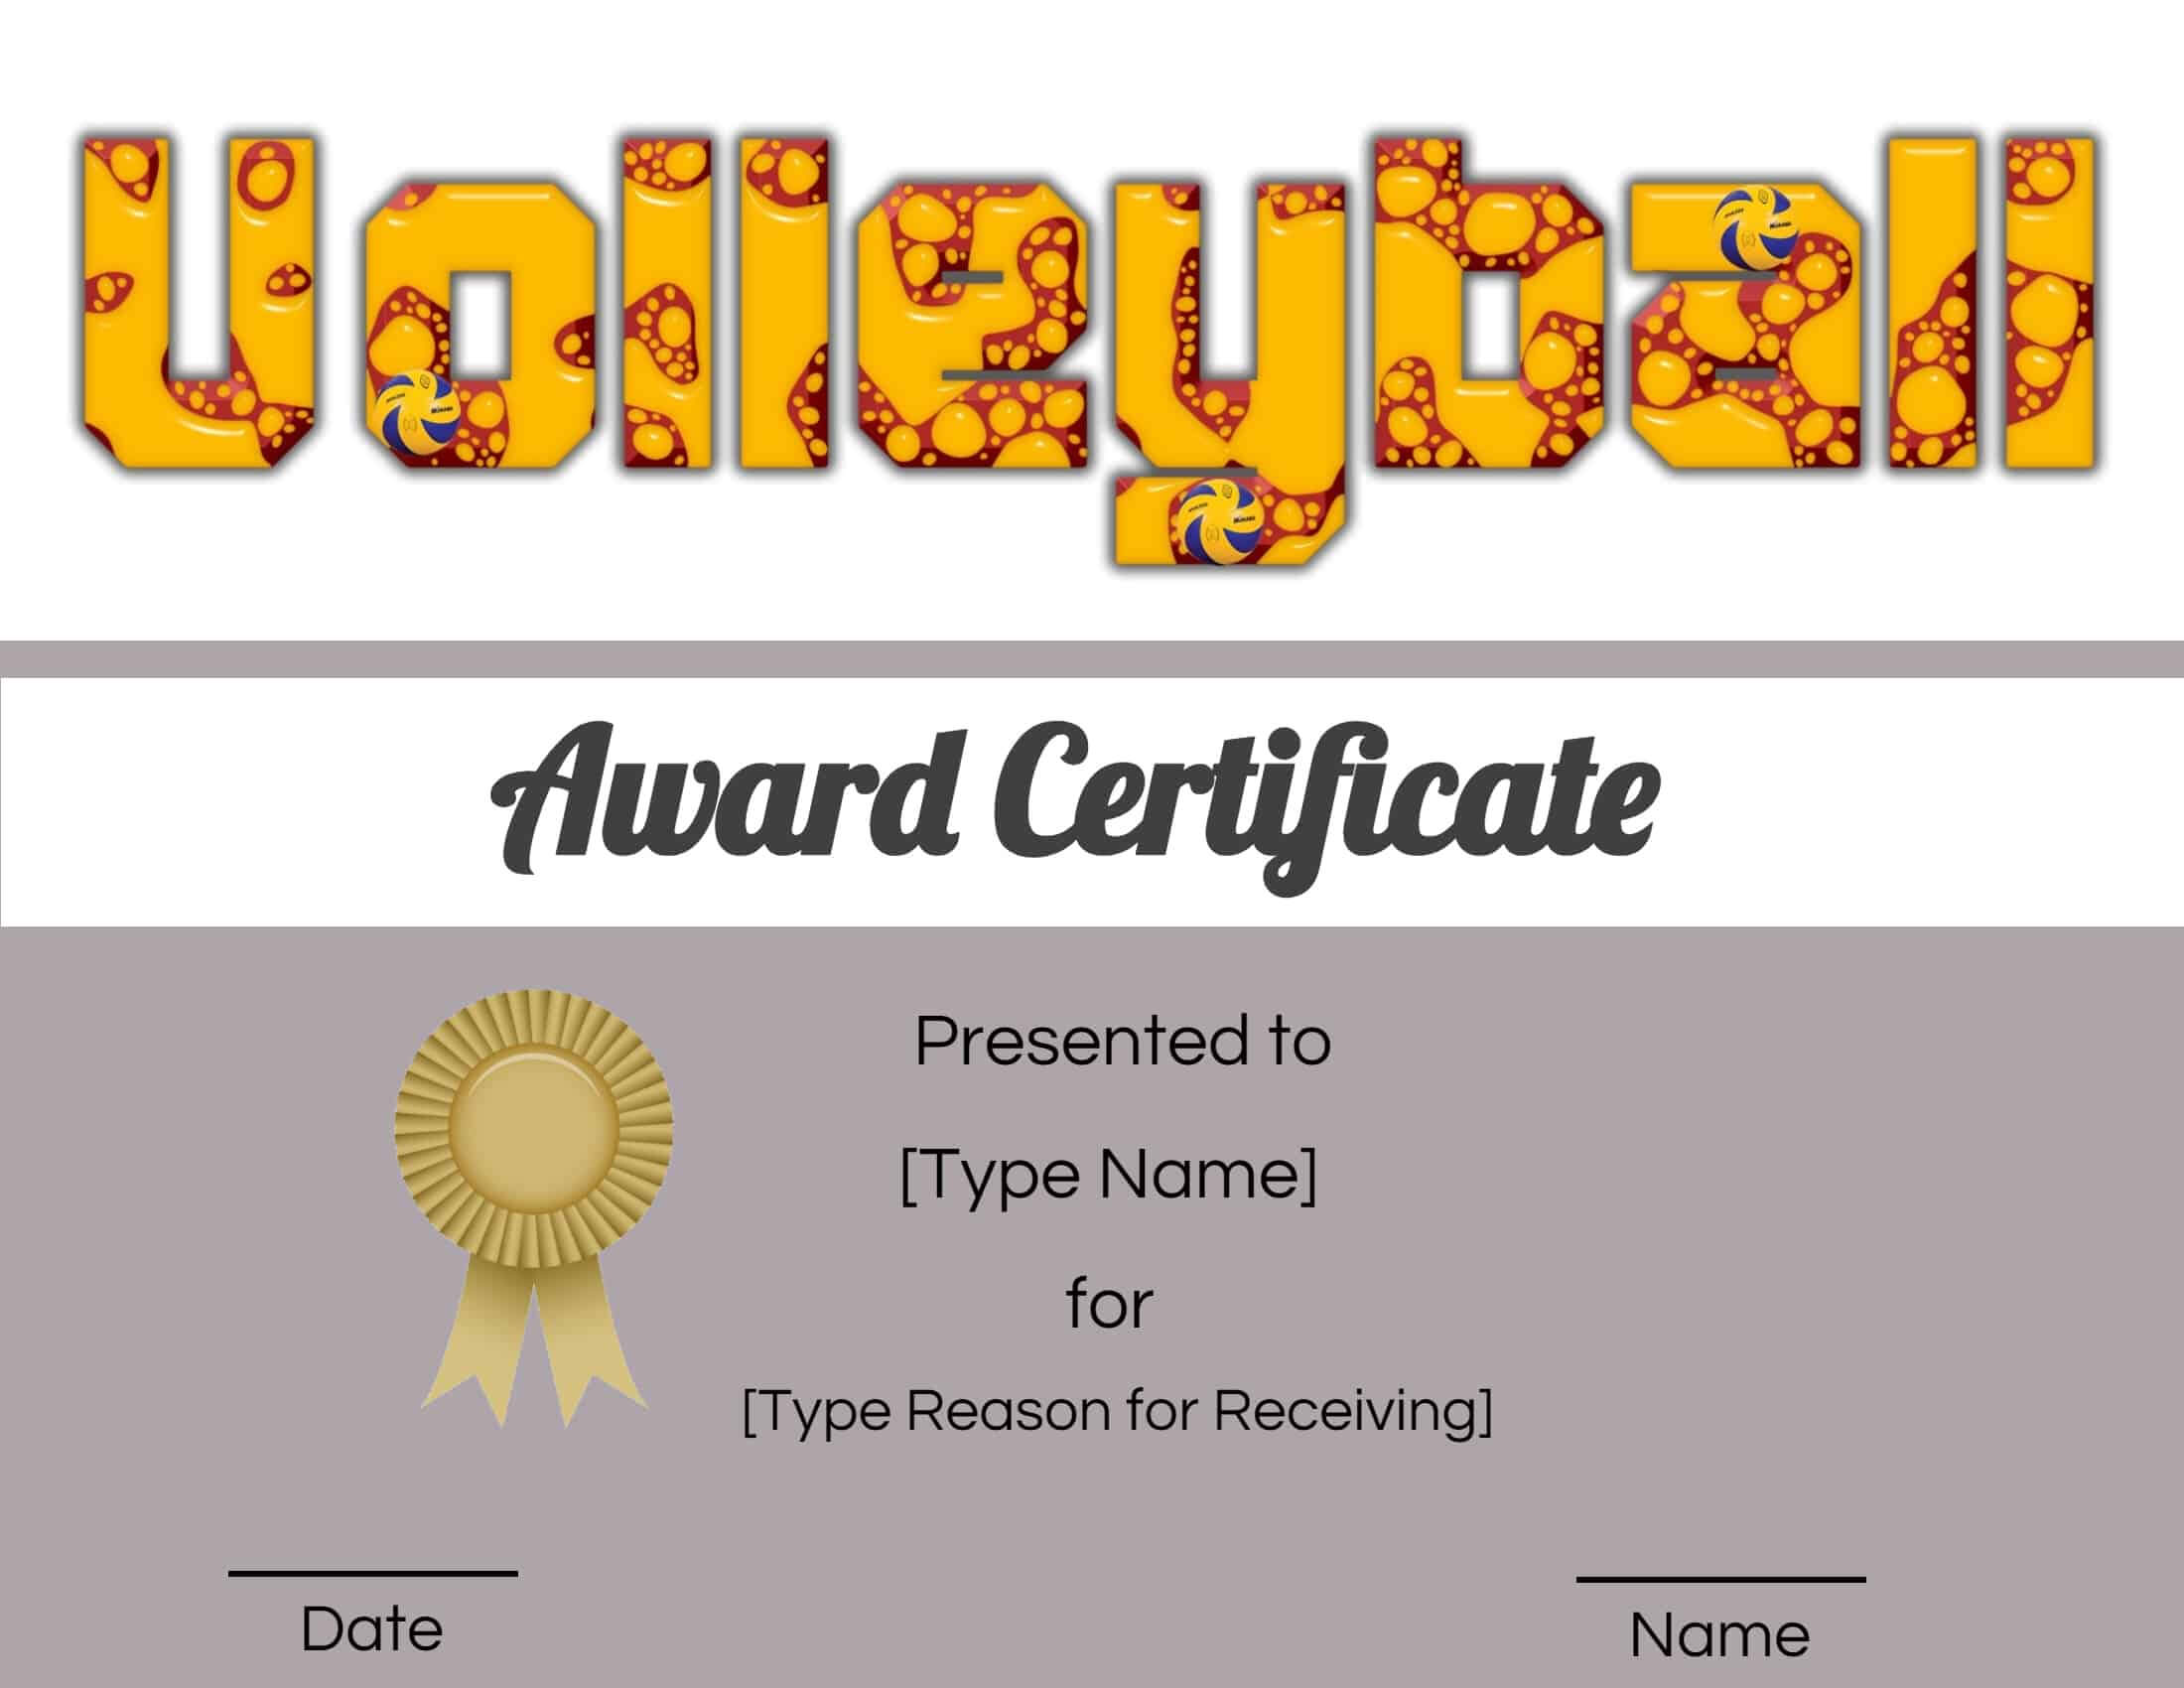 Free Volleyball Certificate | Edit Online And Print At Home Within Rugby League Certificate Templates